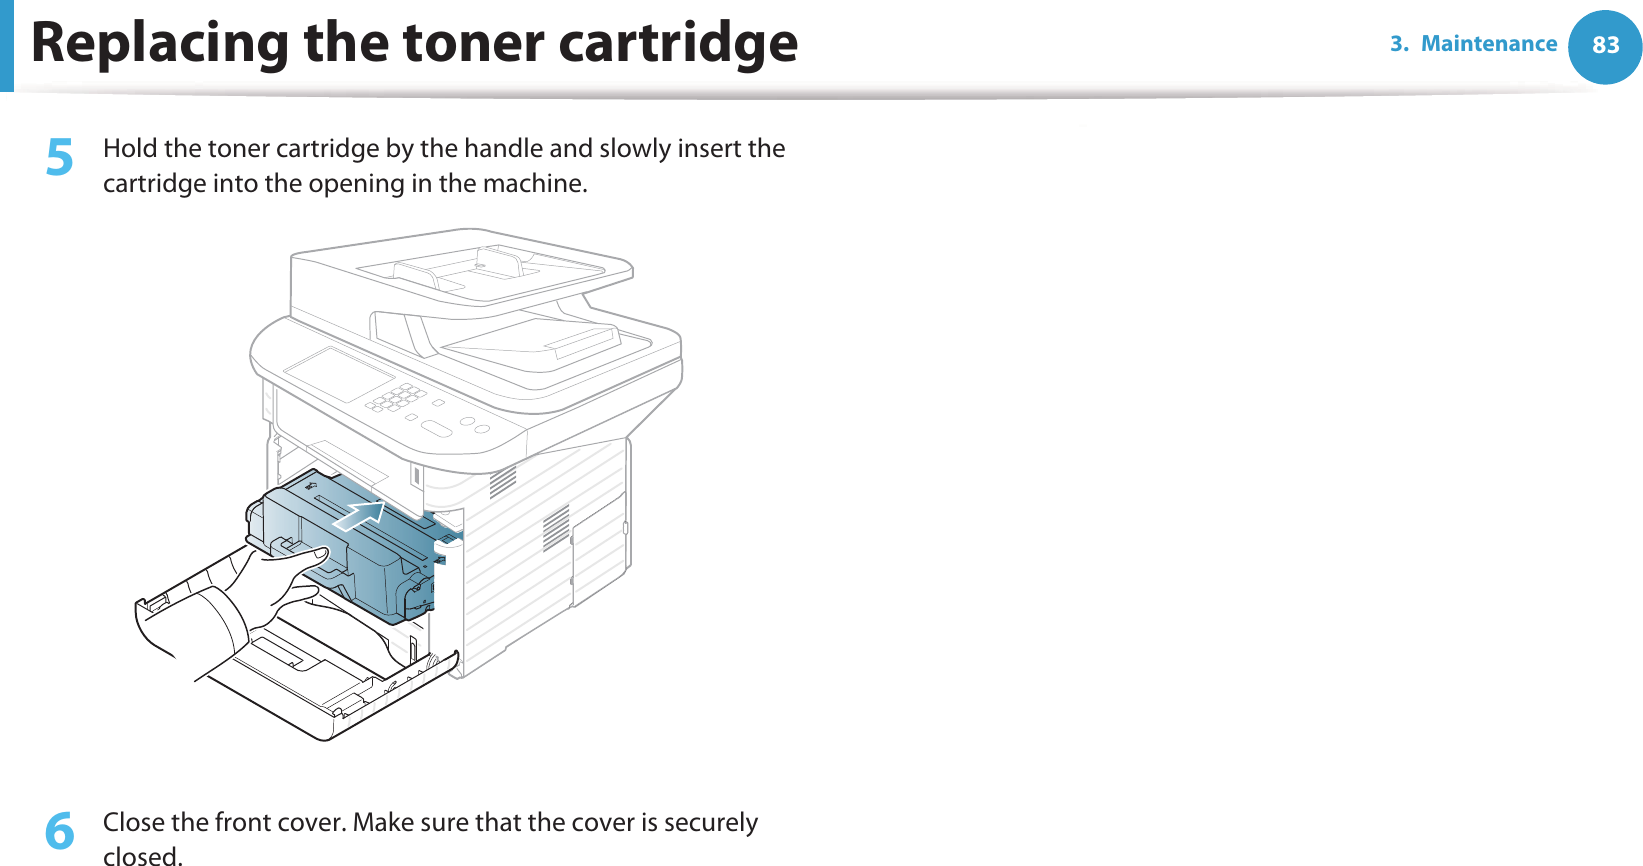 Replacing the toner cartridge 833. Maintenance5  Hold the toner cartridge by the handle and slowly insert the cartridge into the opening in the machine. 6  Close the front cover. Make sure that the cover is securely closed. 